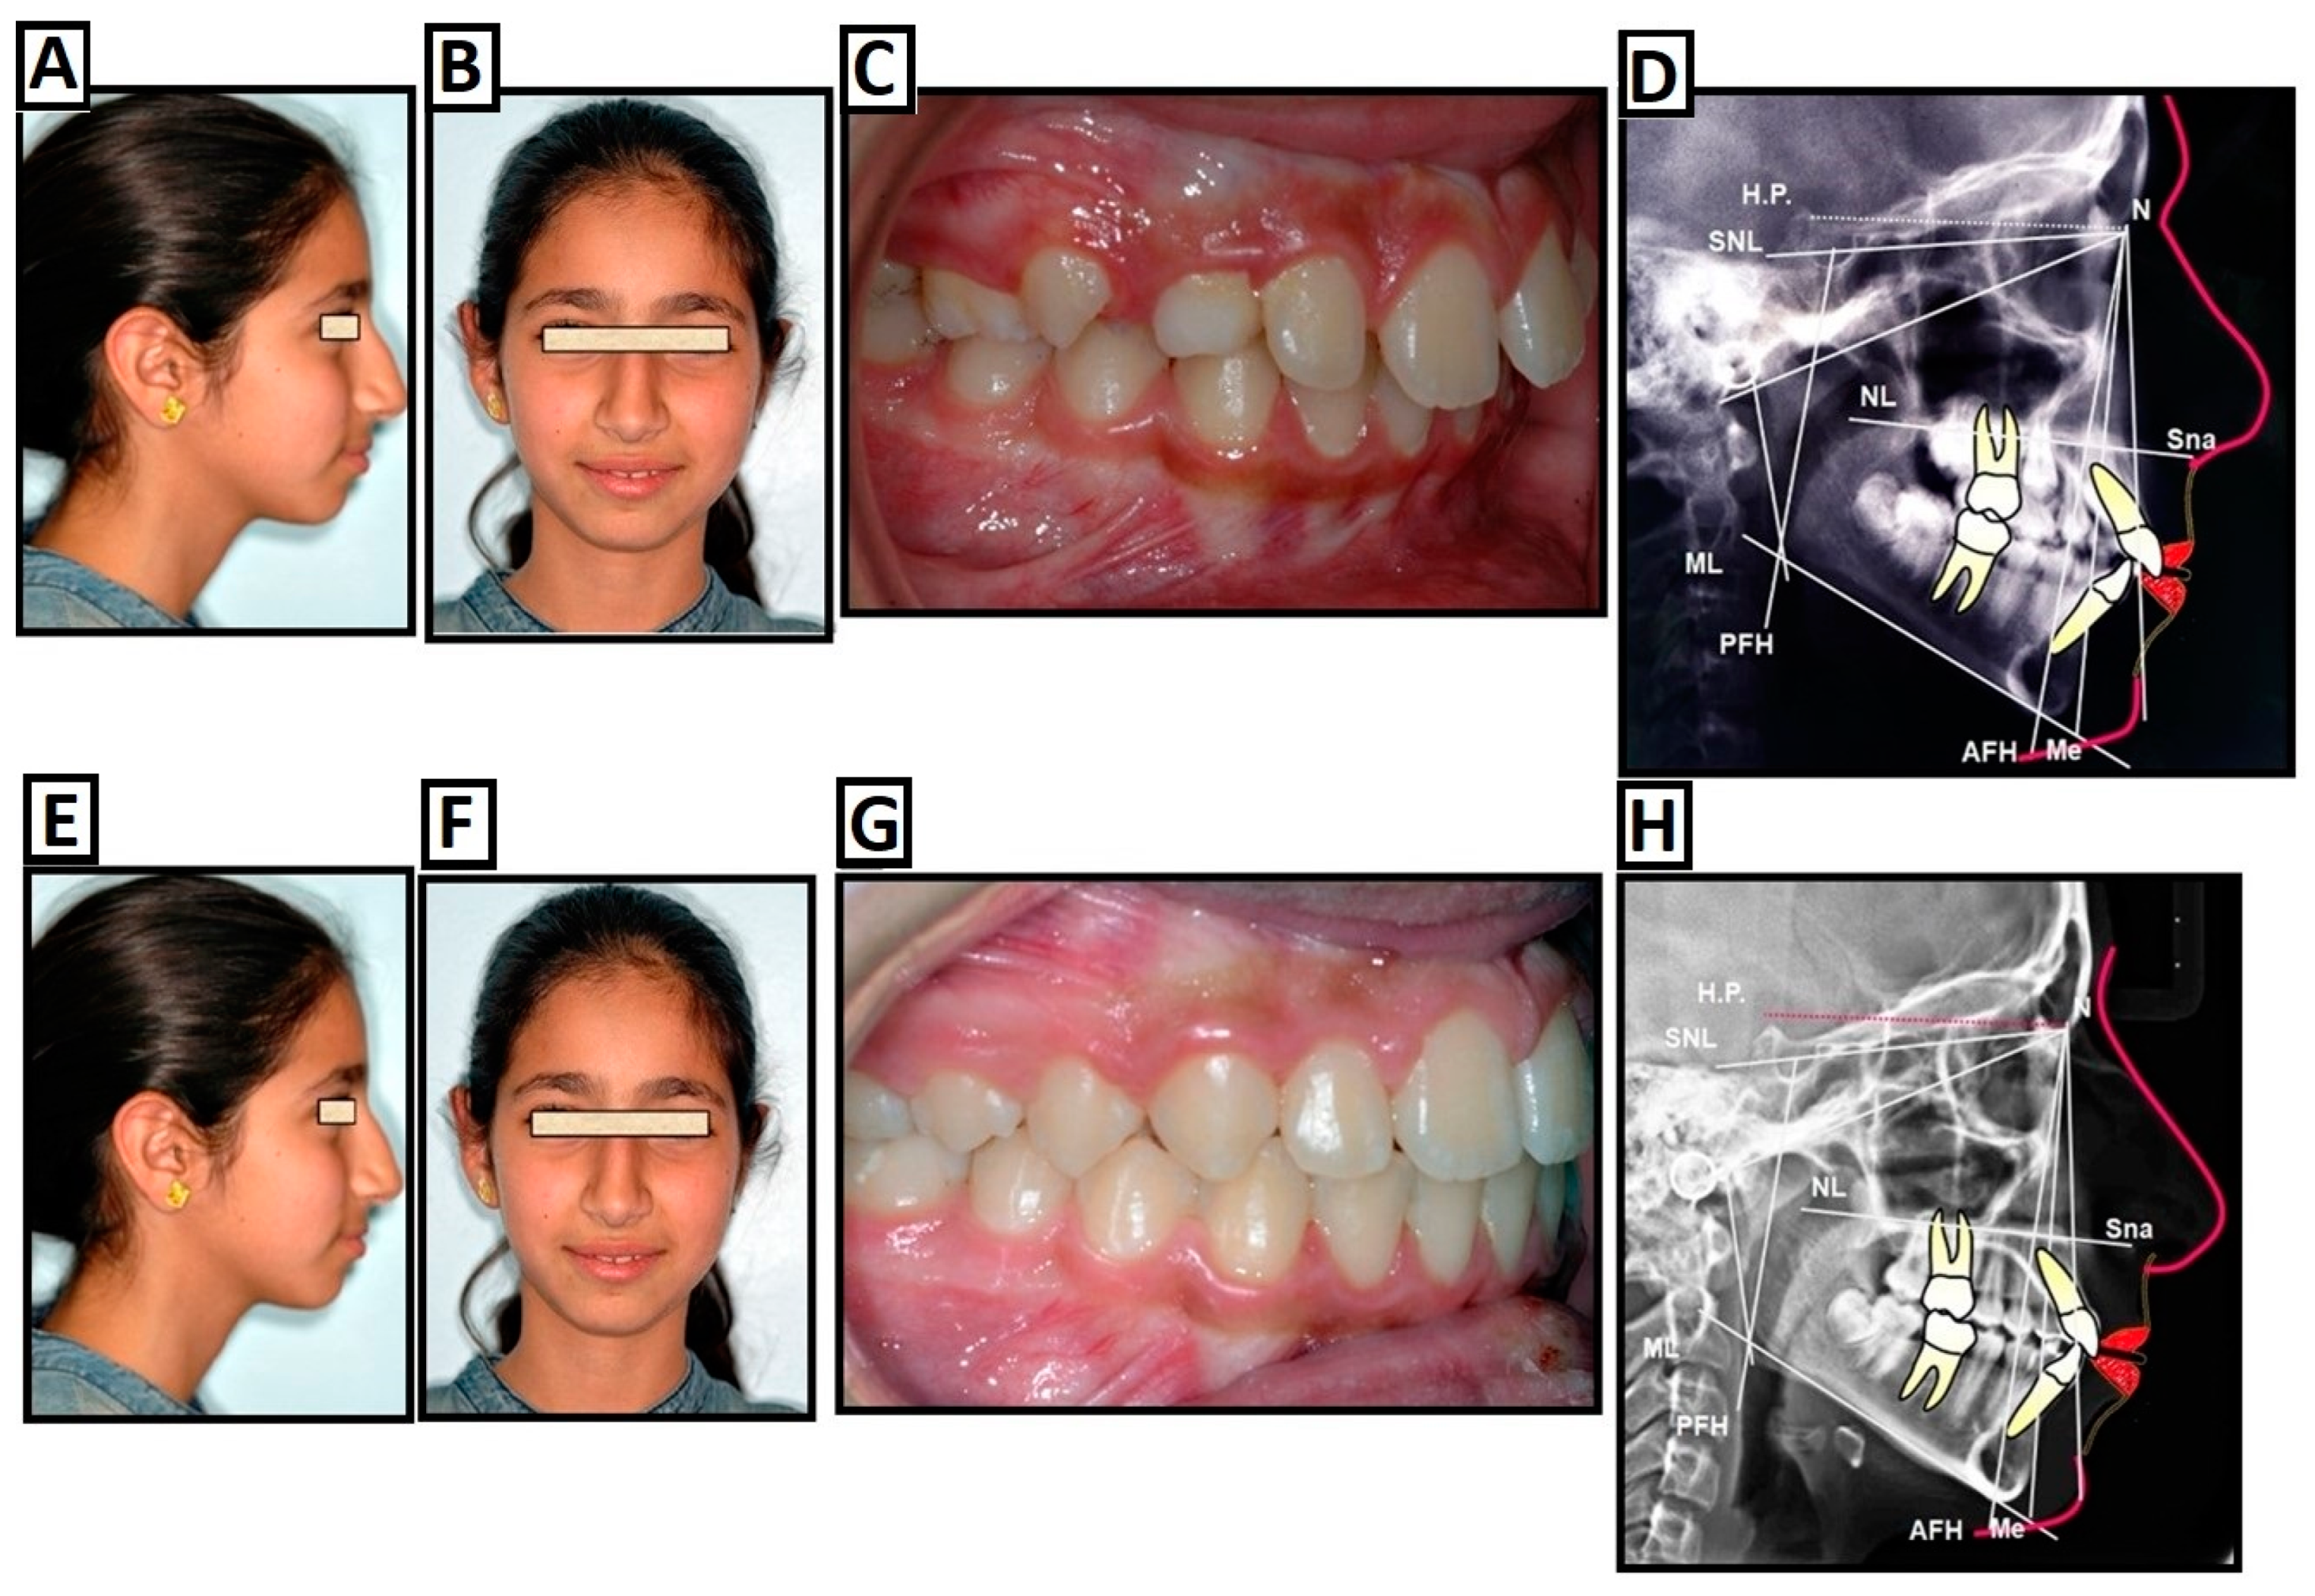 Management of Skeletal Class II Malocclusion by Surgery-First Approach – A  Short Term Clinical Experience